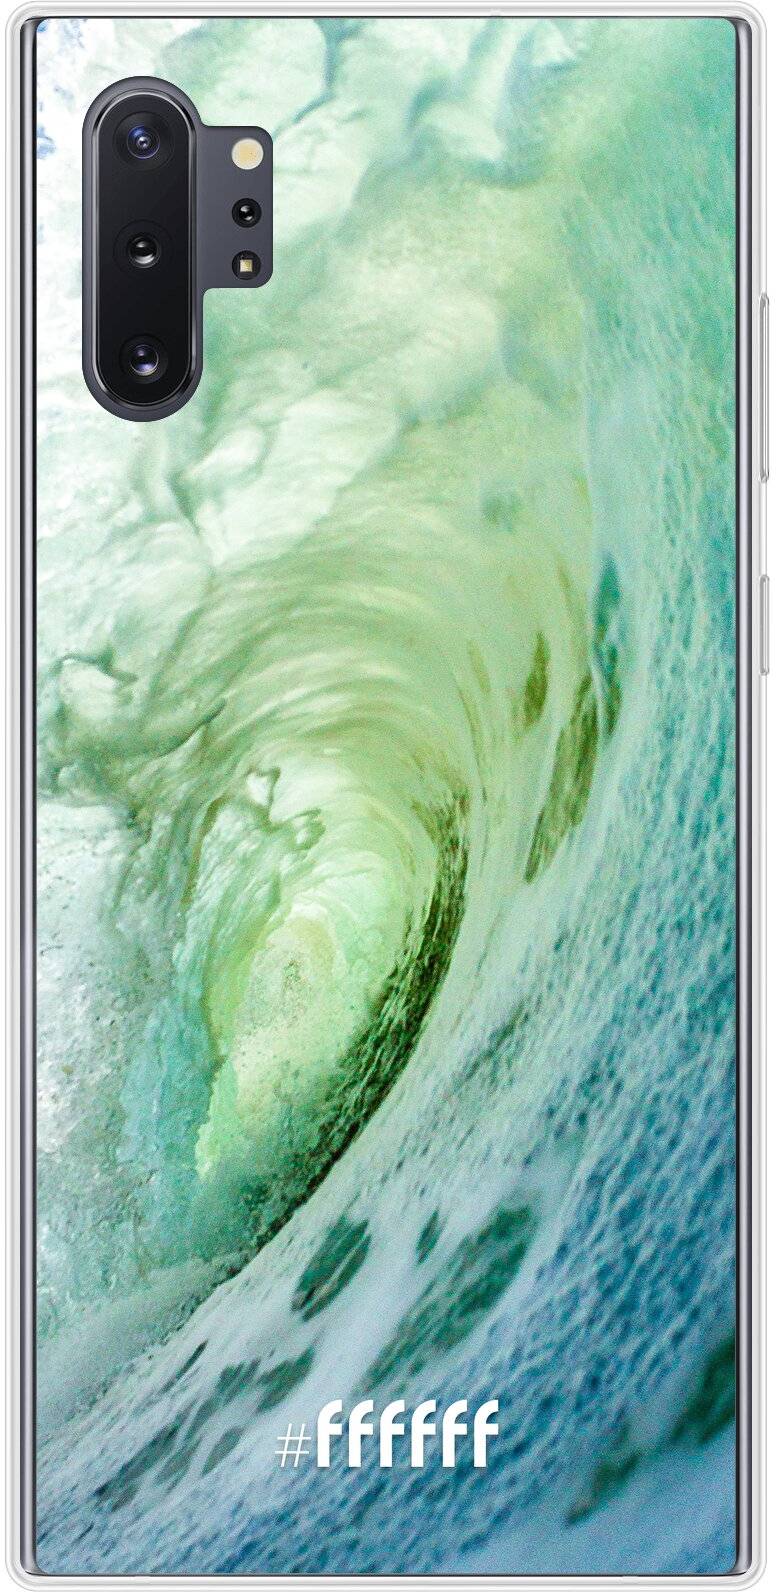 It's a Wave Galaxy Note 10 Plus